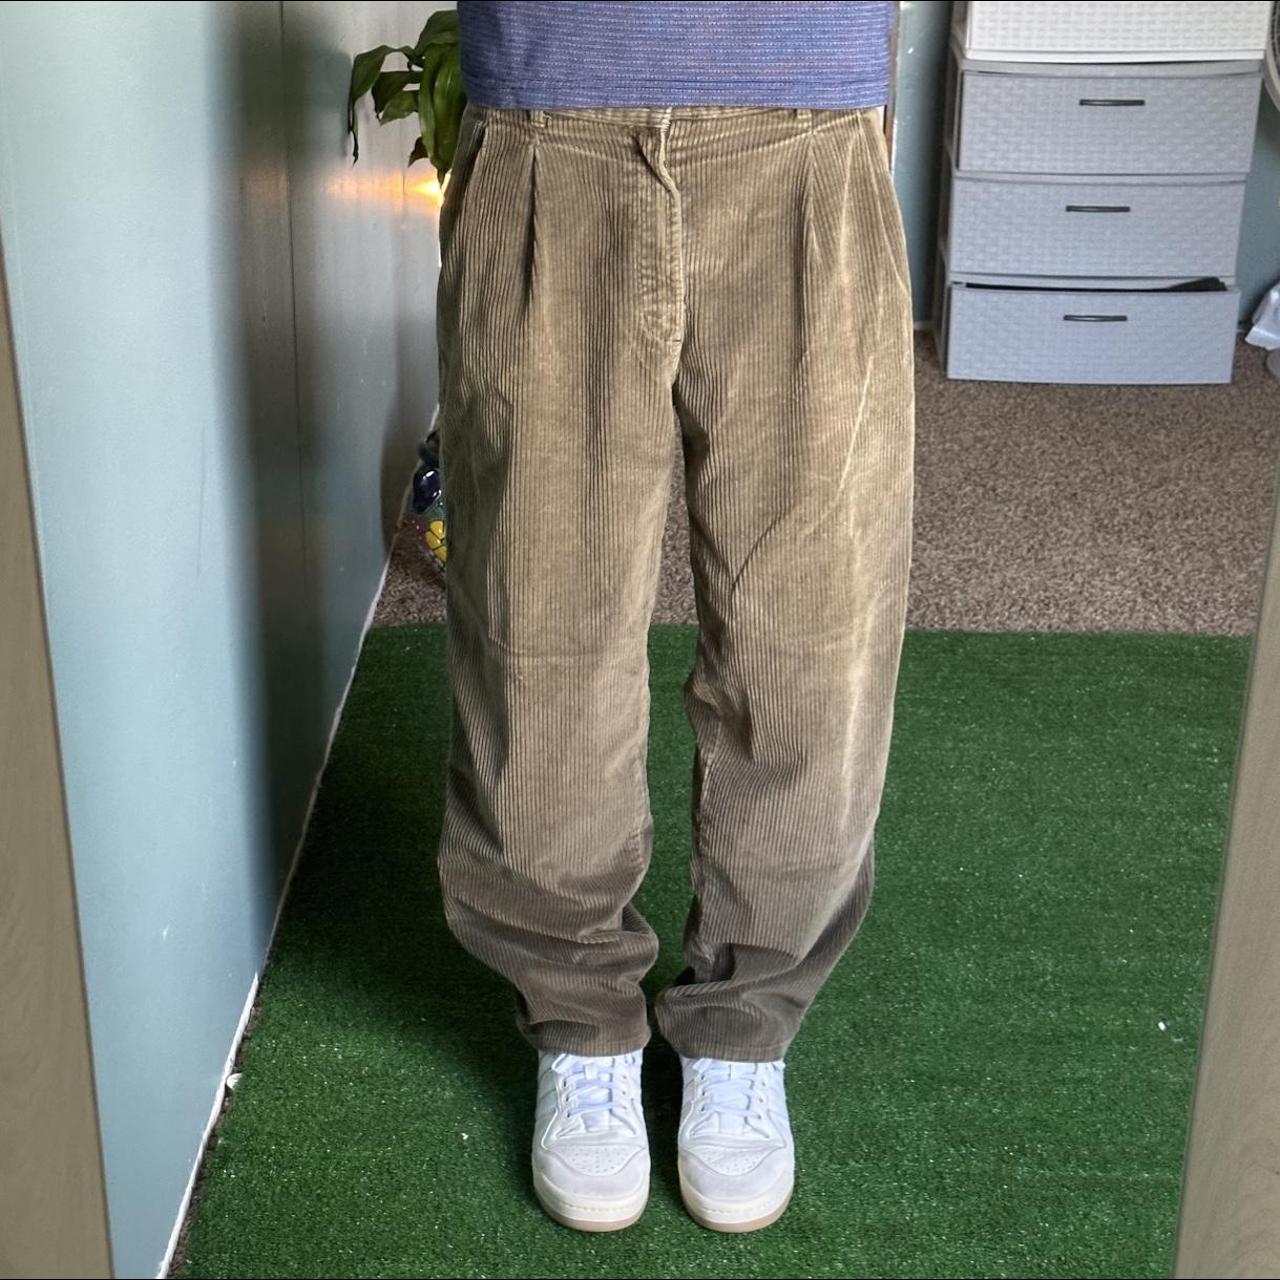 90’s dockers corduroy pants • fits a 33, 6ft for... - Depop